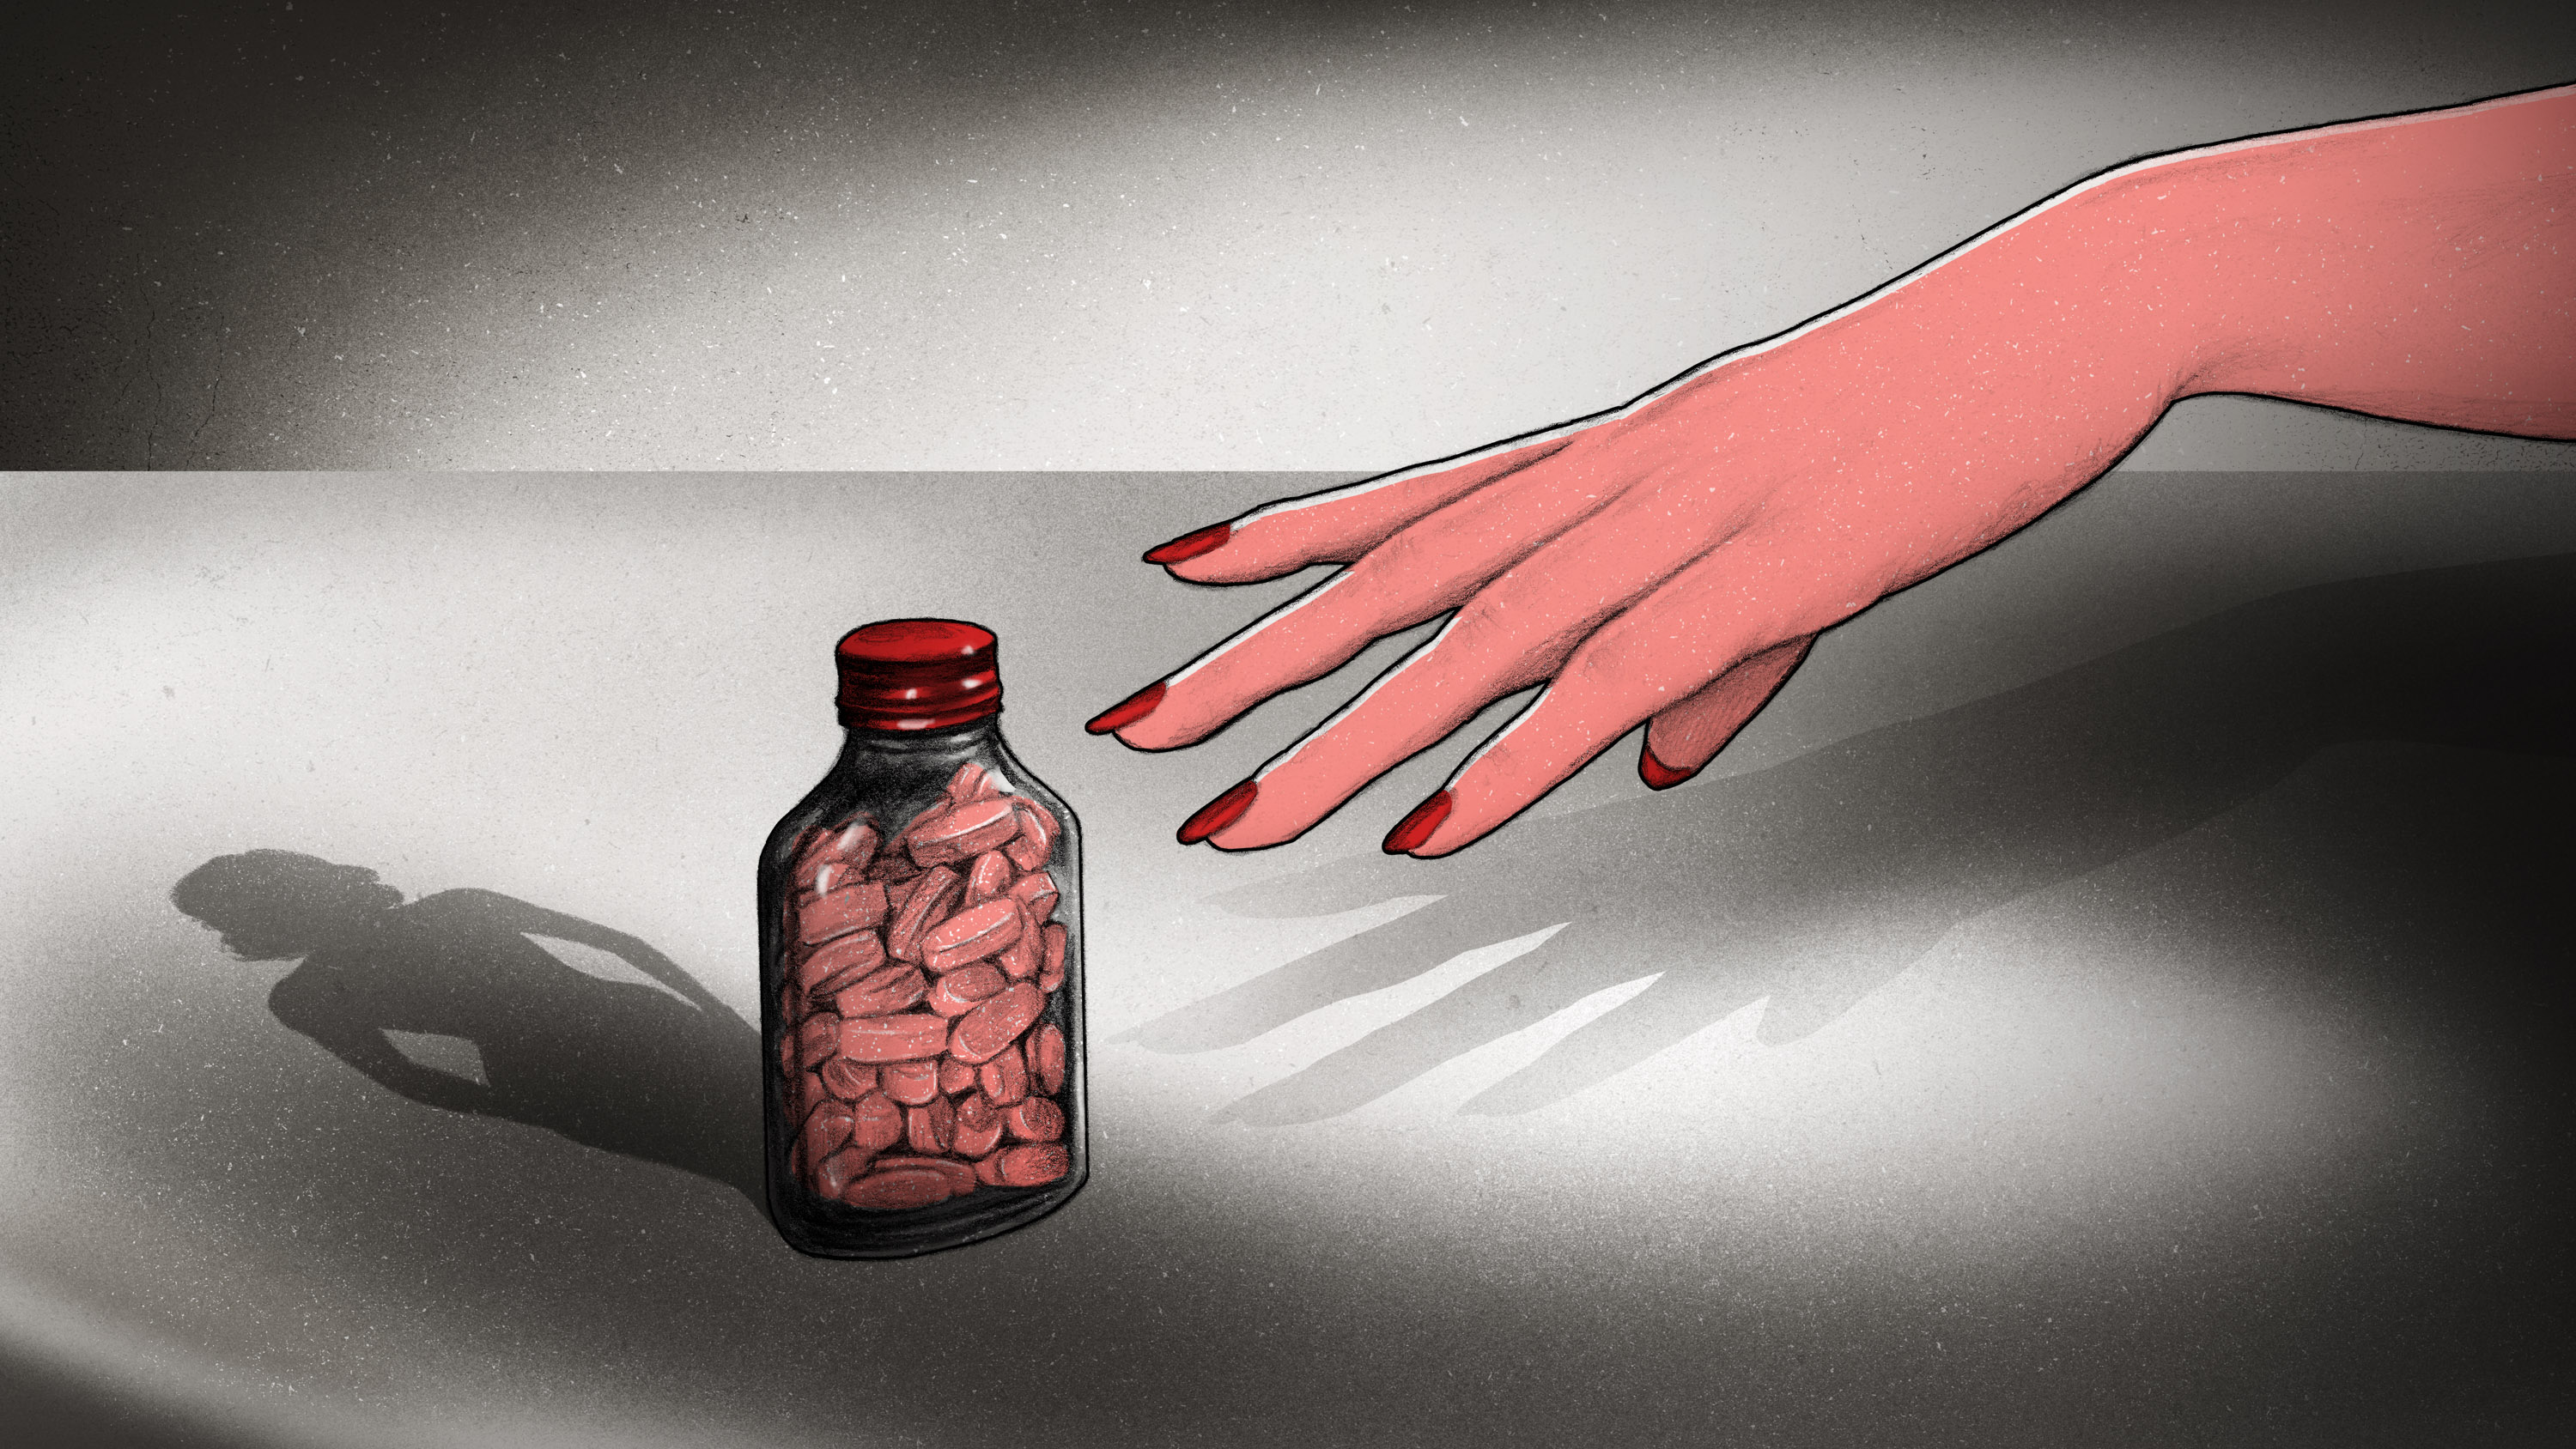 a manicured hand reaches for a bottle of pills that is casting the shadow of a slimmer person